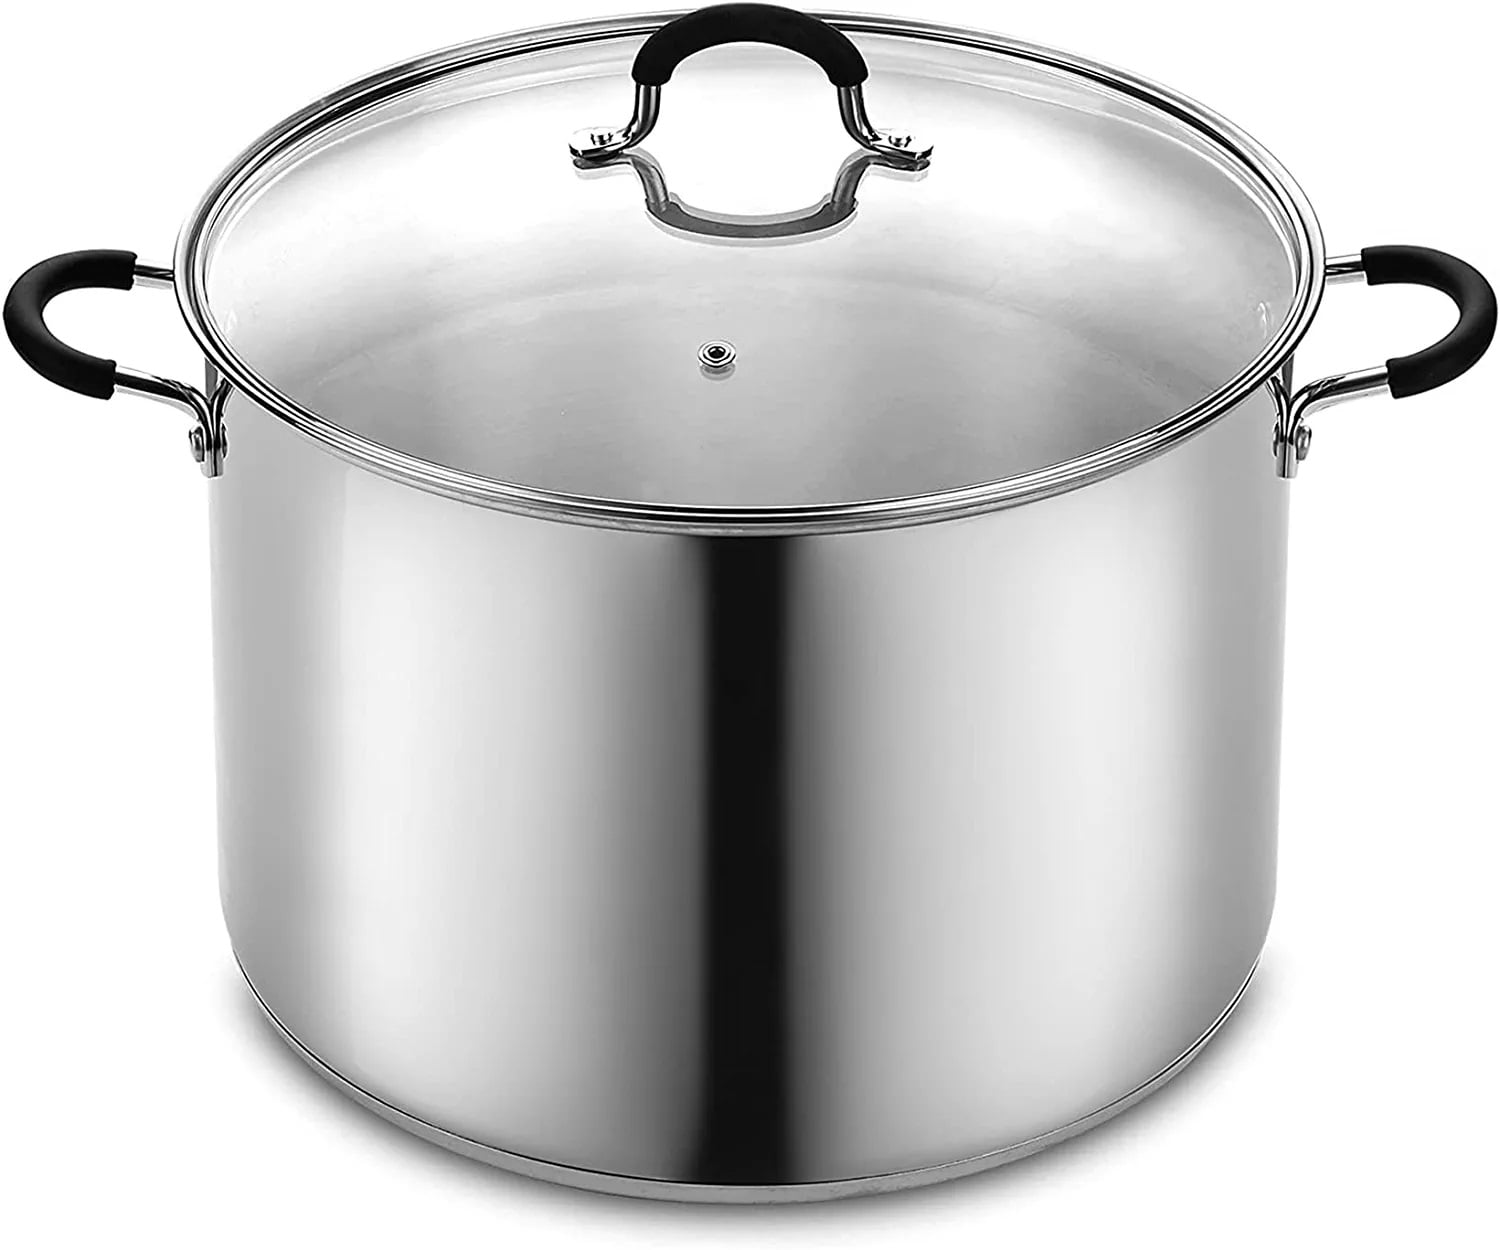 Stock Pots,5 QT Stainless Steel Saucepot with Glass Lid Silver  Anti-scalding Handle Stockpot By DERUI CREATION (5QT(9.45”x6.10”), Silver)